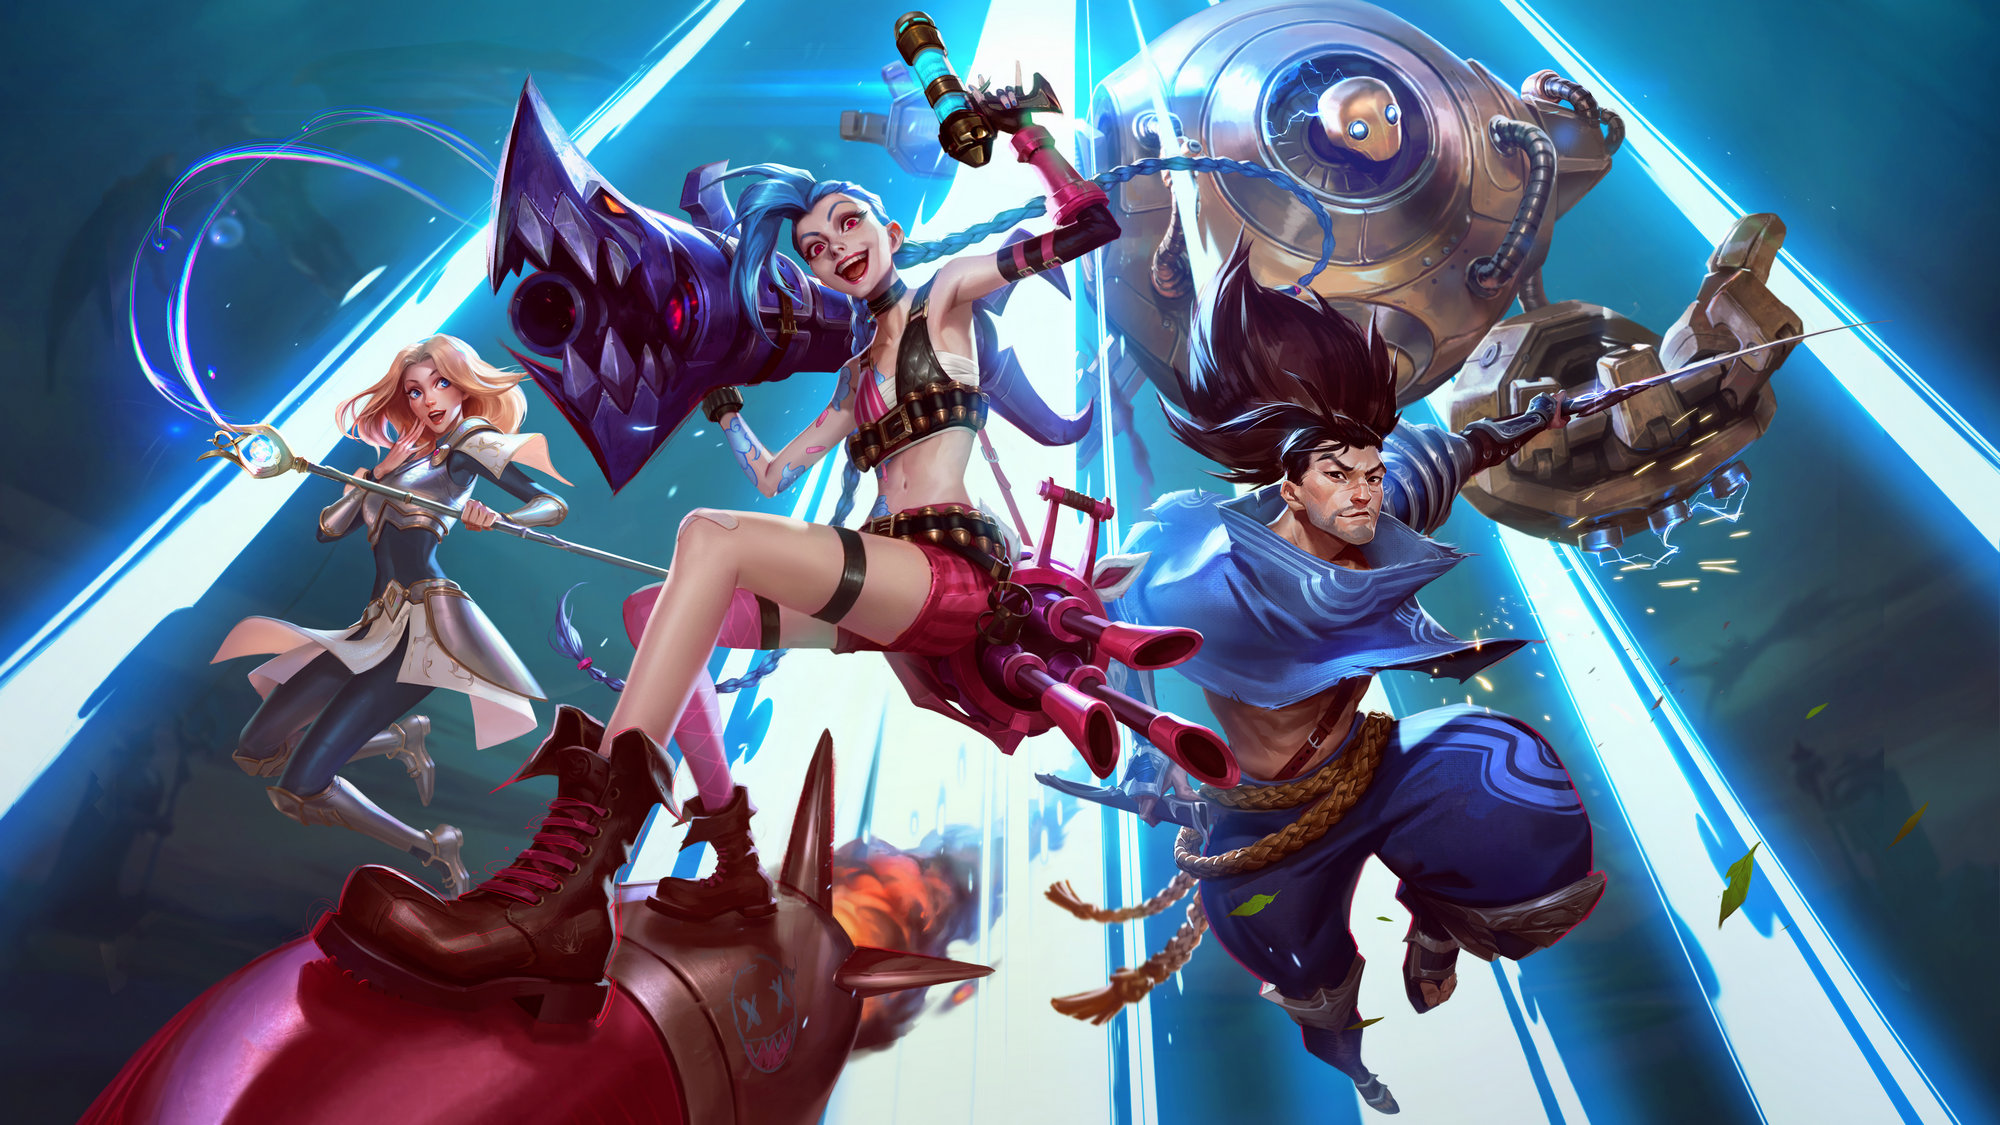 League of Legends: Wild Rift (for iOS) - Review 2021 - PCMag Australia